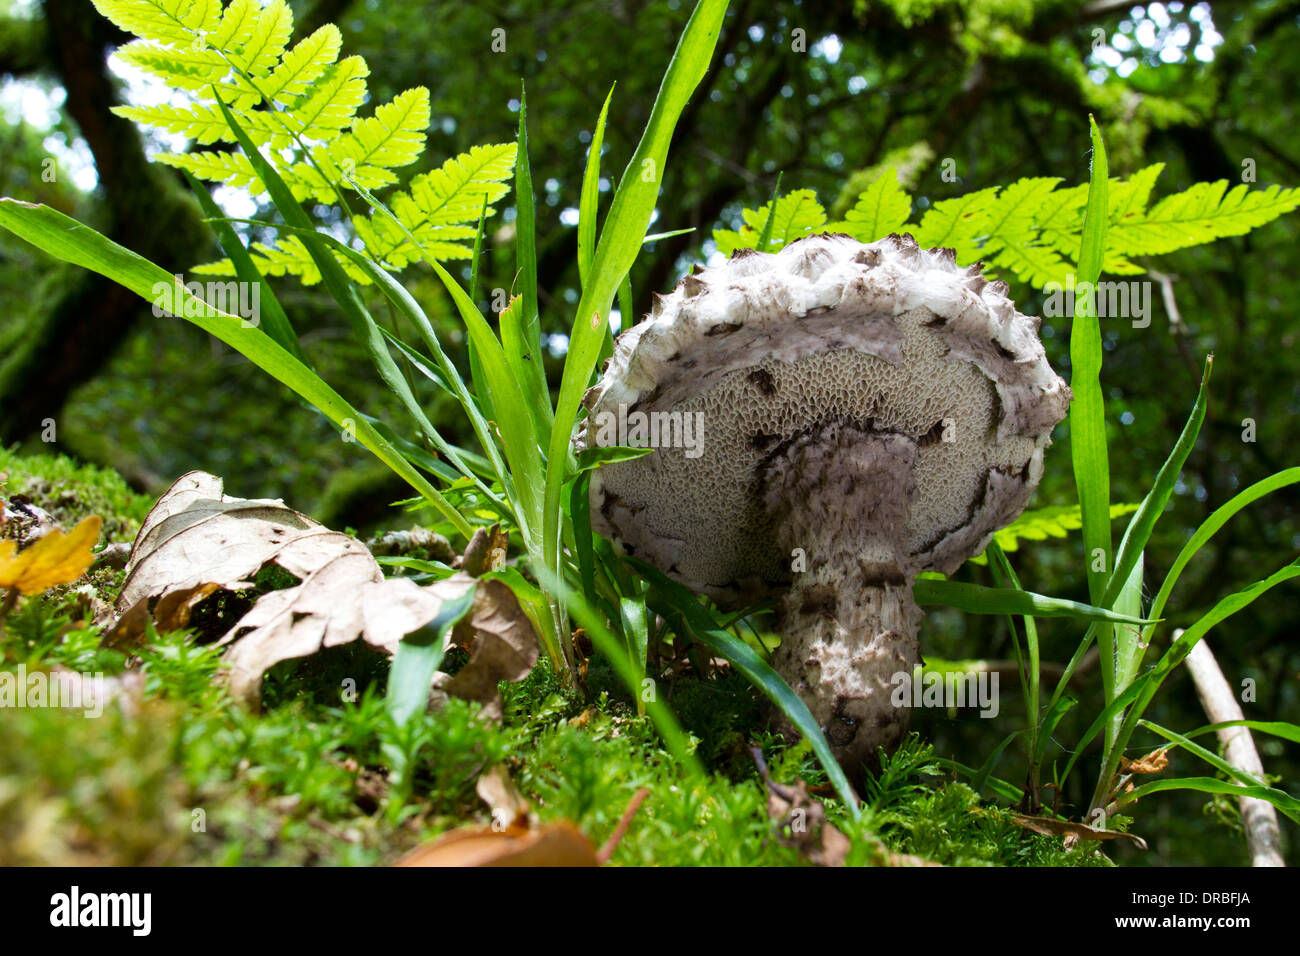 Old Man of the Woods fungus (Strobilomyces floccopus) fruiting body. Herefordshire, England. July. Stock Photo